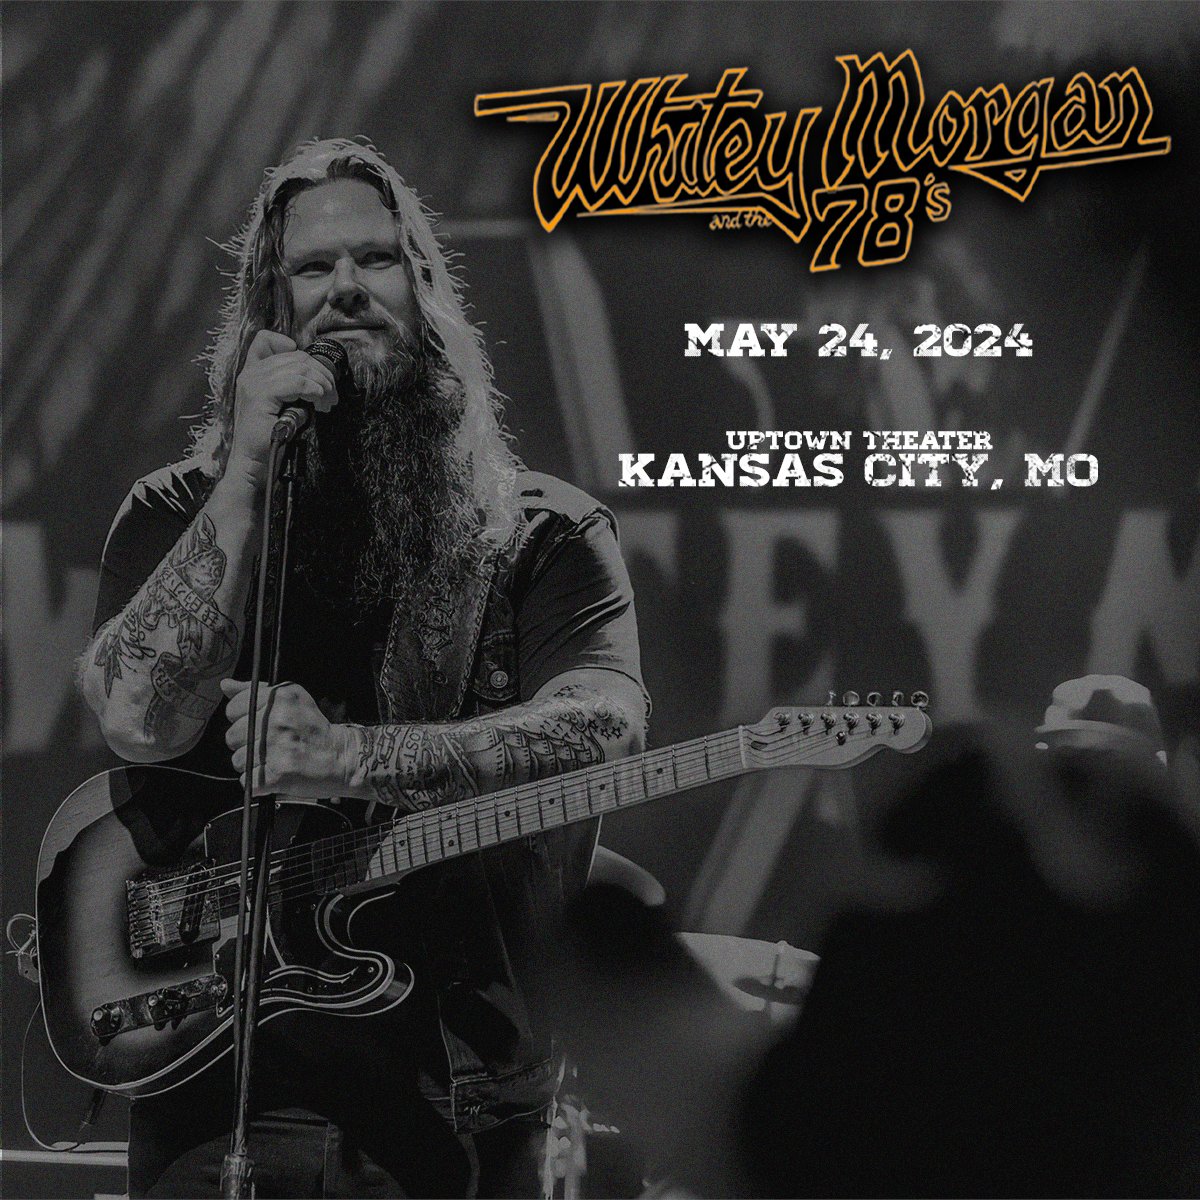 KANSAS CITY!! We're heading your way to headline @uptowntheaterkc on May 24! Tickets go on sale next Friday, March 15. Get yours and get there 🤘 whiteymorgan.com/#tour